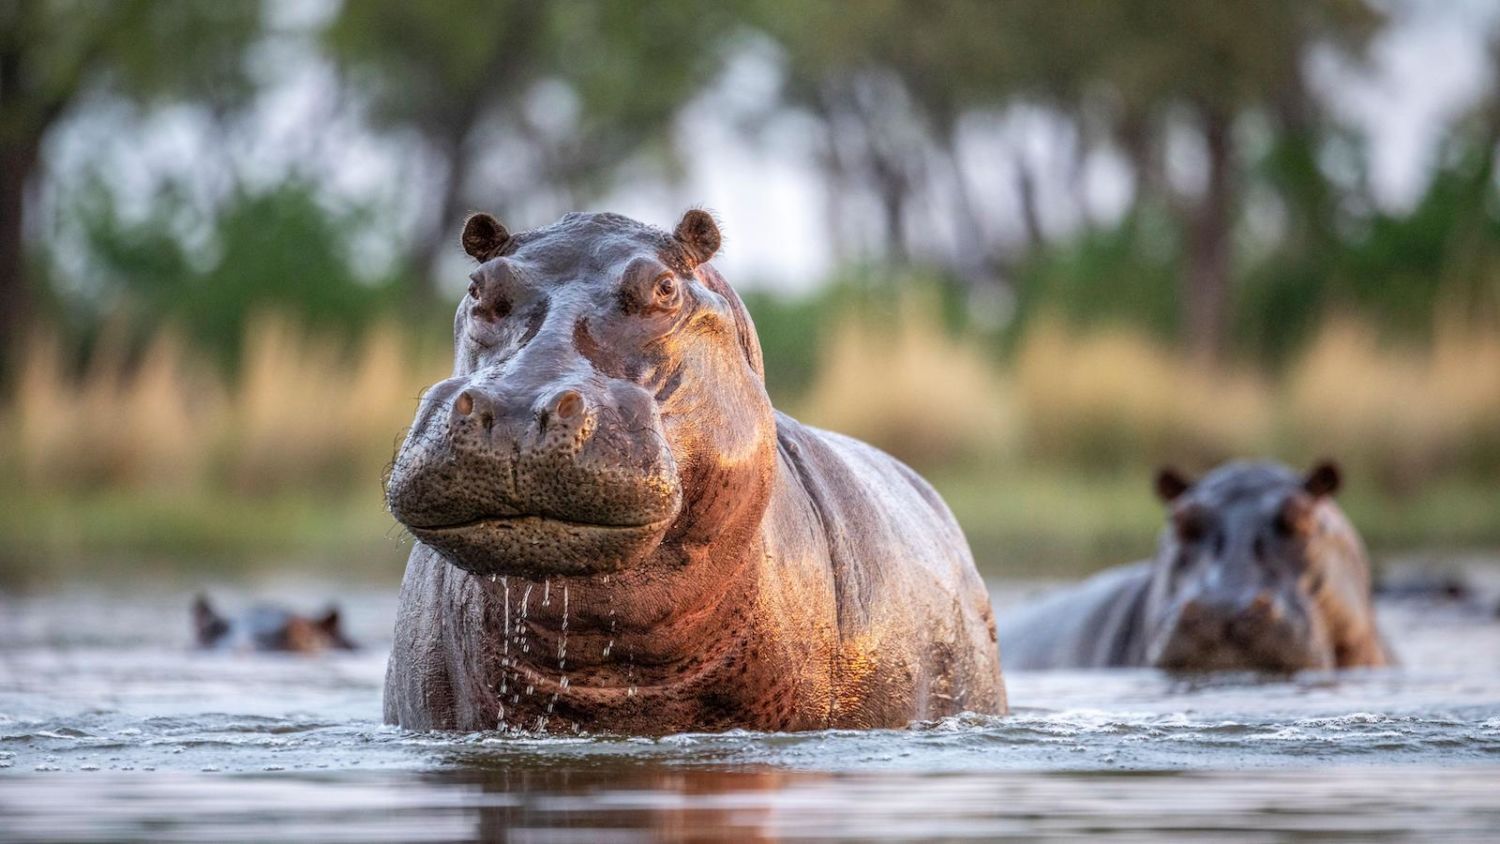 Hippos Are in Trouble. Will an Endangered Listing Save Them? - Yale E360